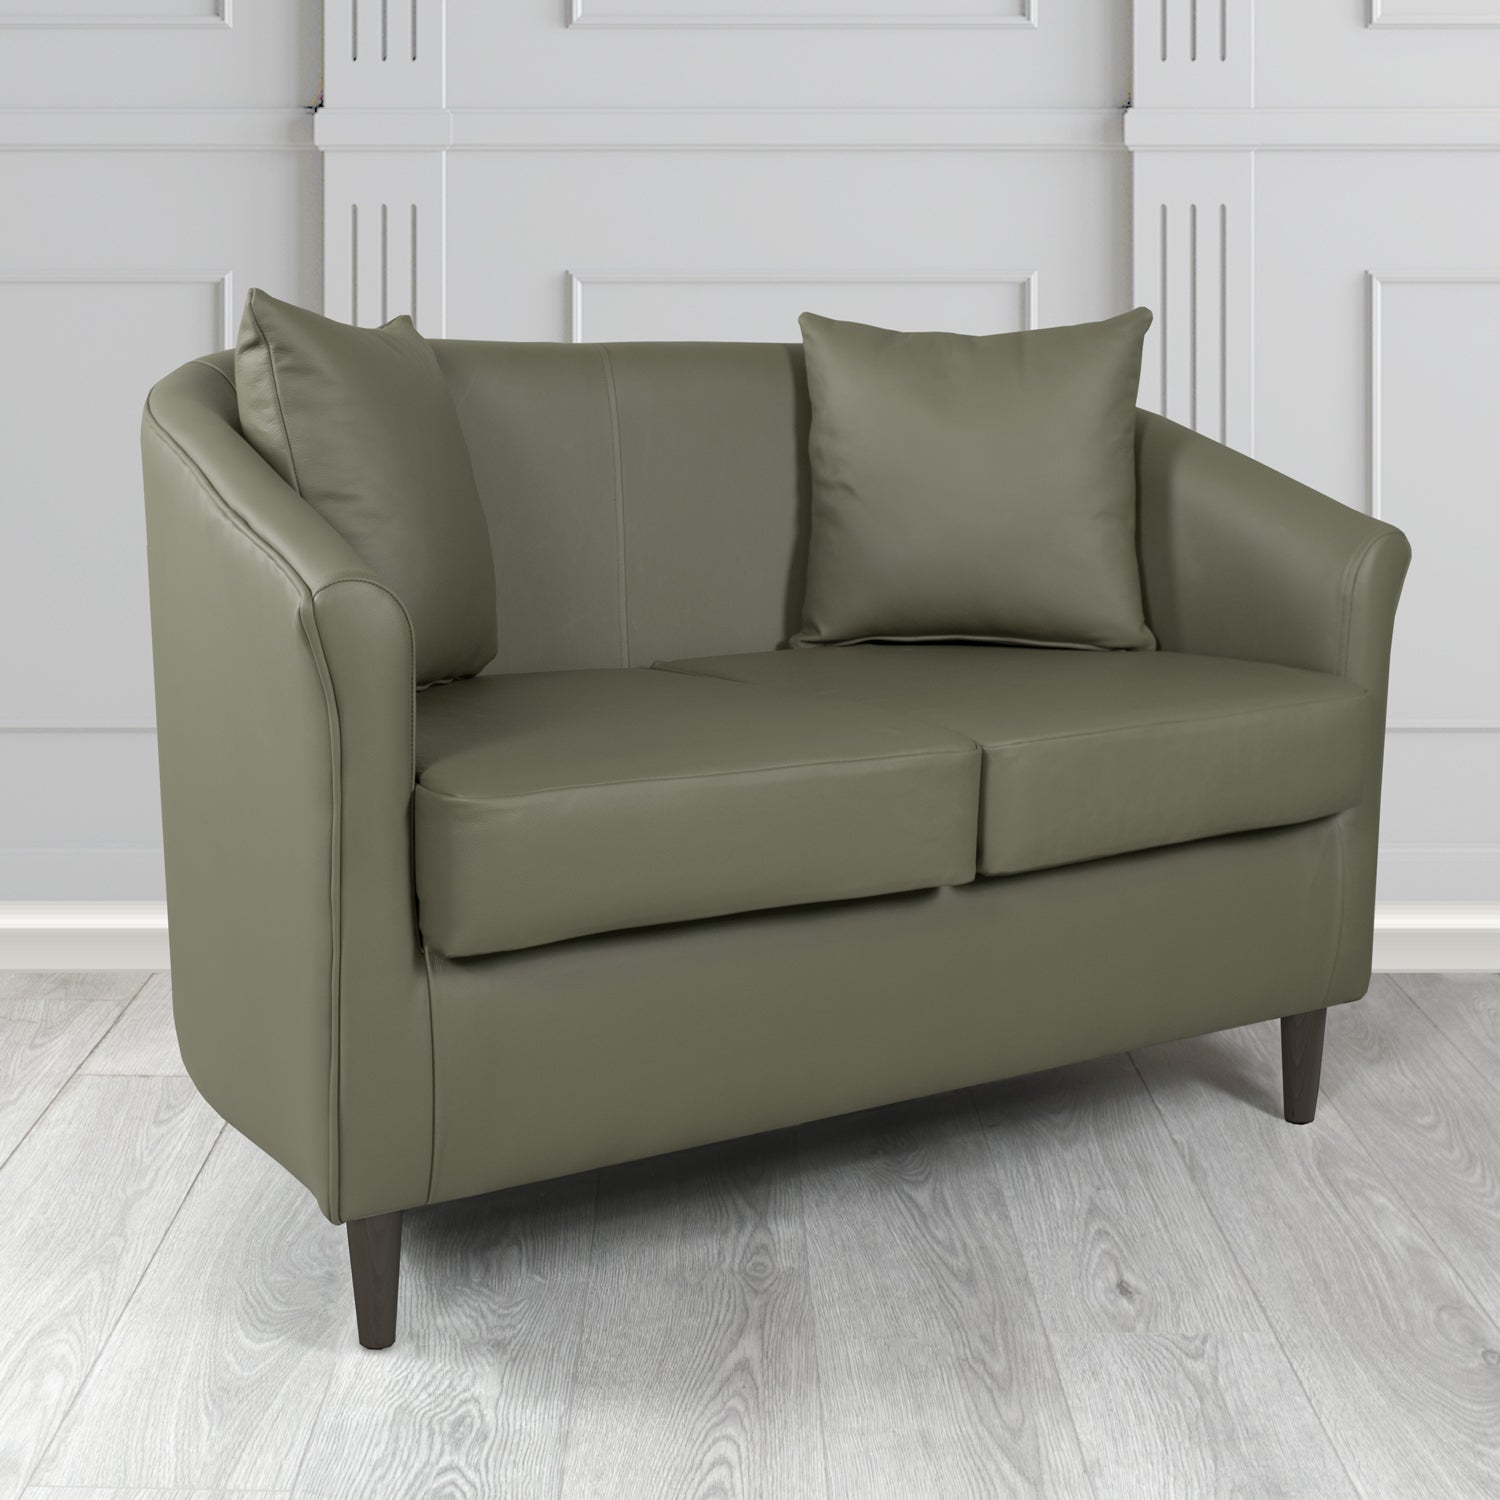 St Tropez Shelly Steel Crib 5 Genuine Leather 2 Seater Tub Sofa with Scatter Cushions - The Tub Chair Shop